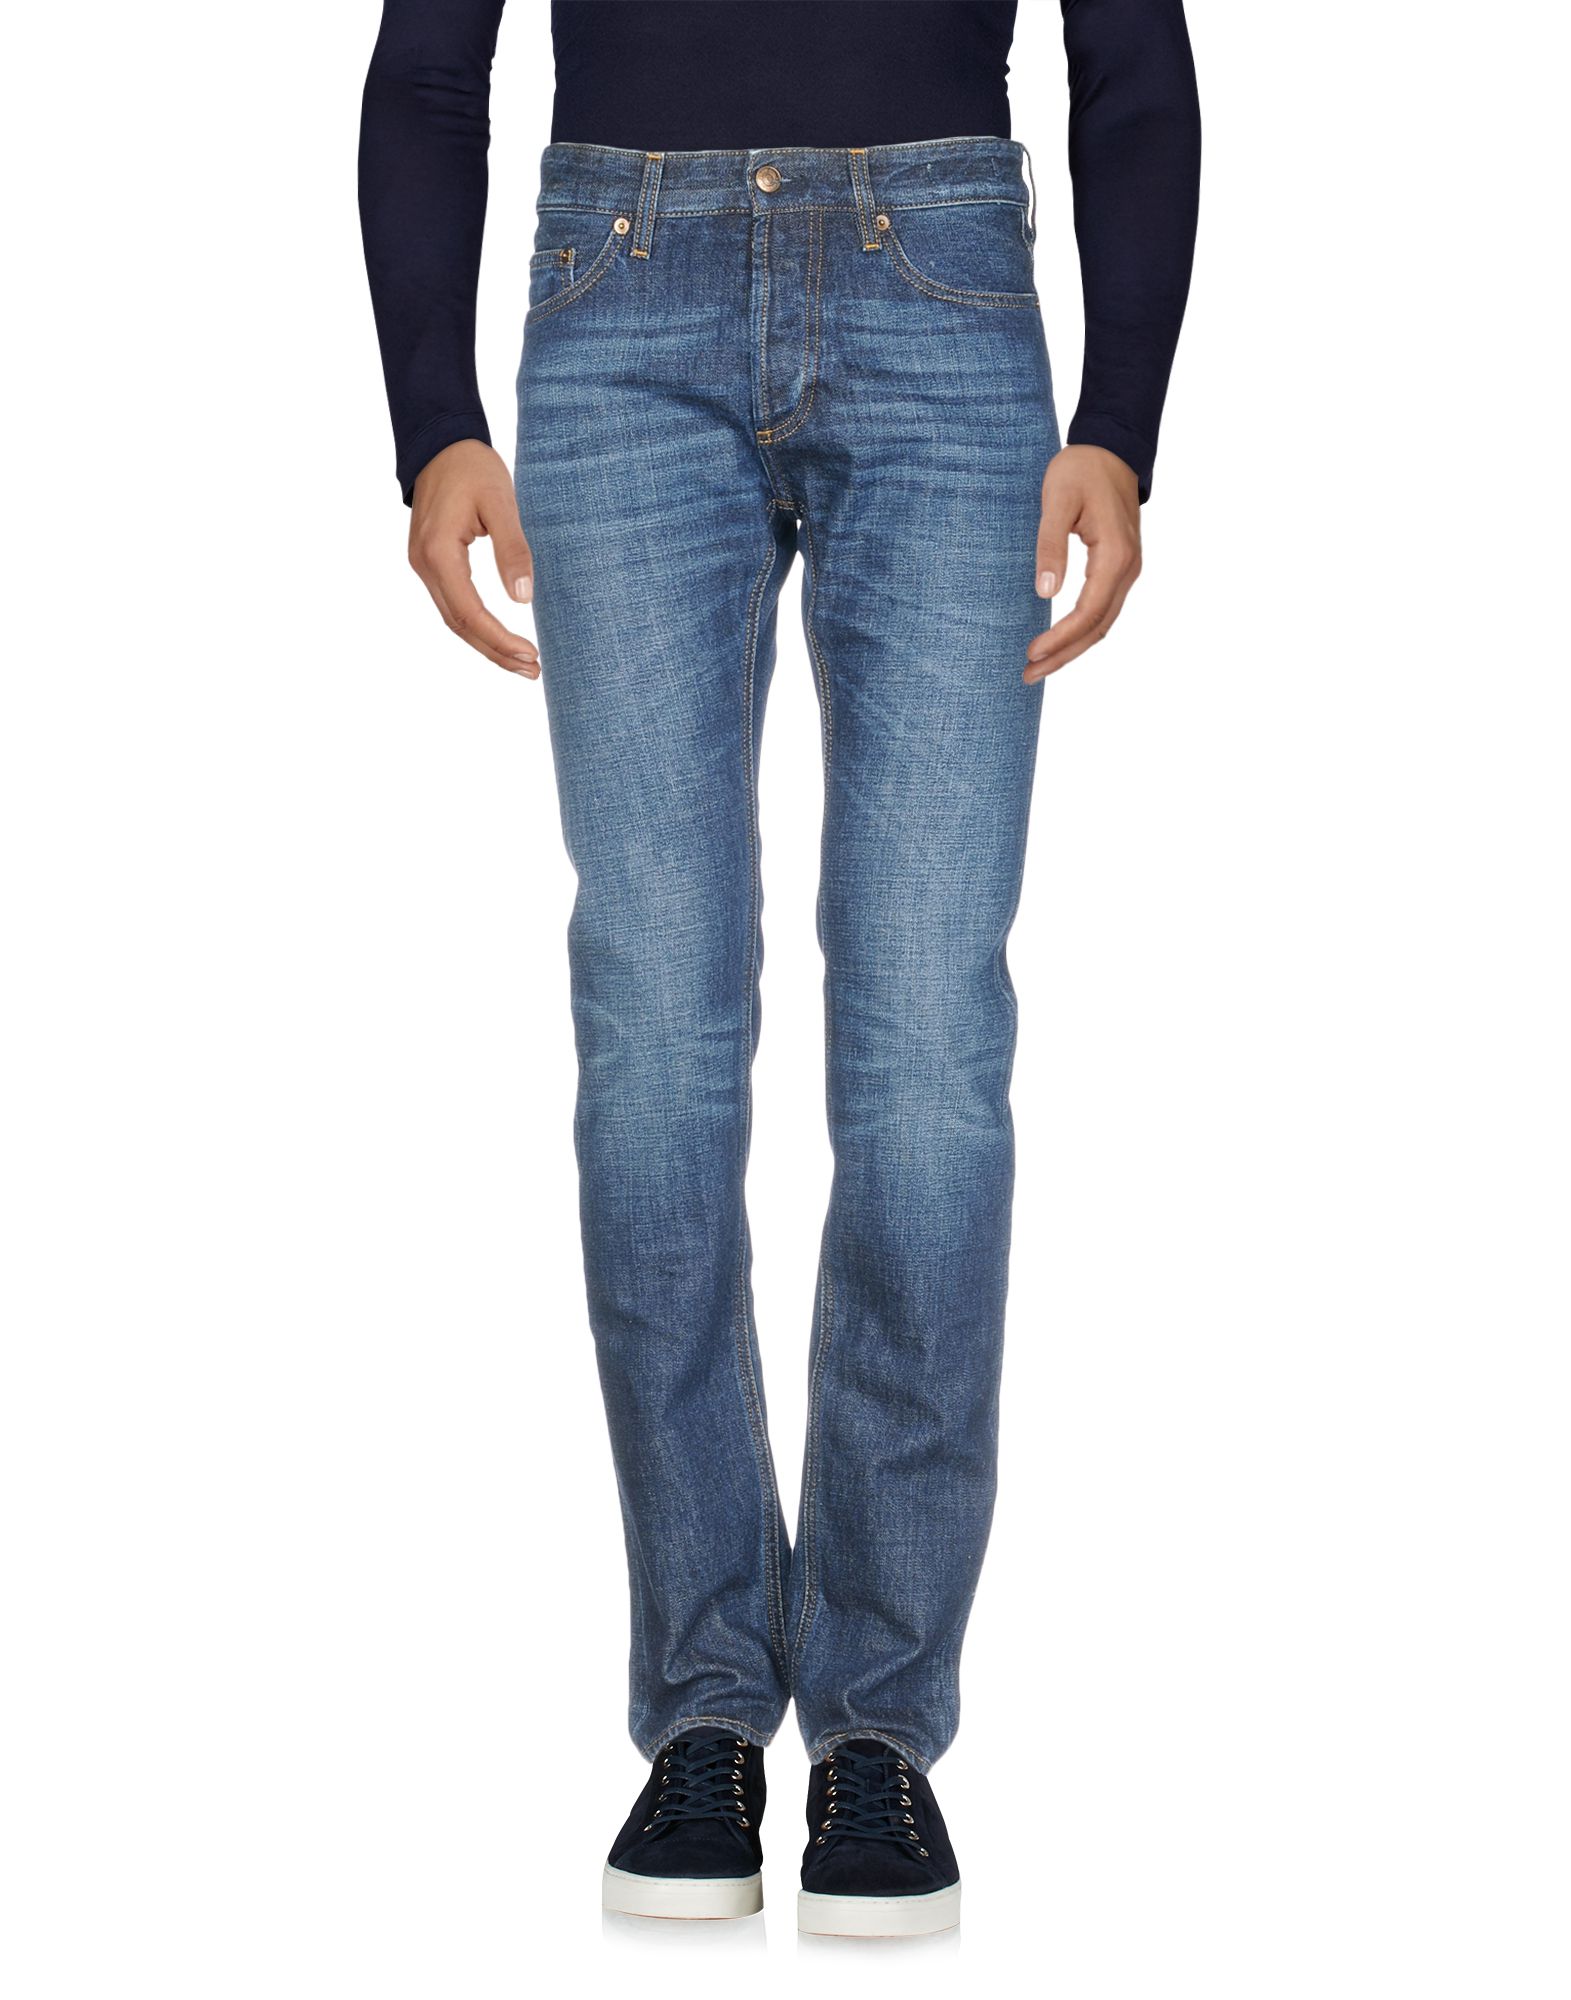 MAURO GRIFONI JEANS,42675942SM 3